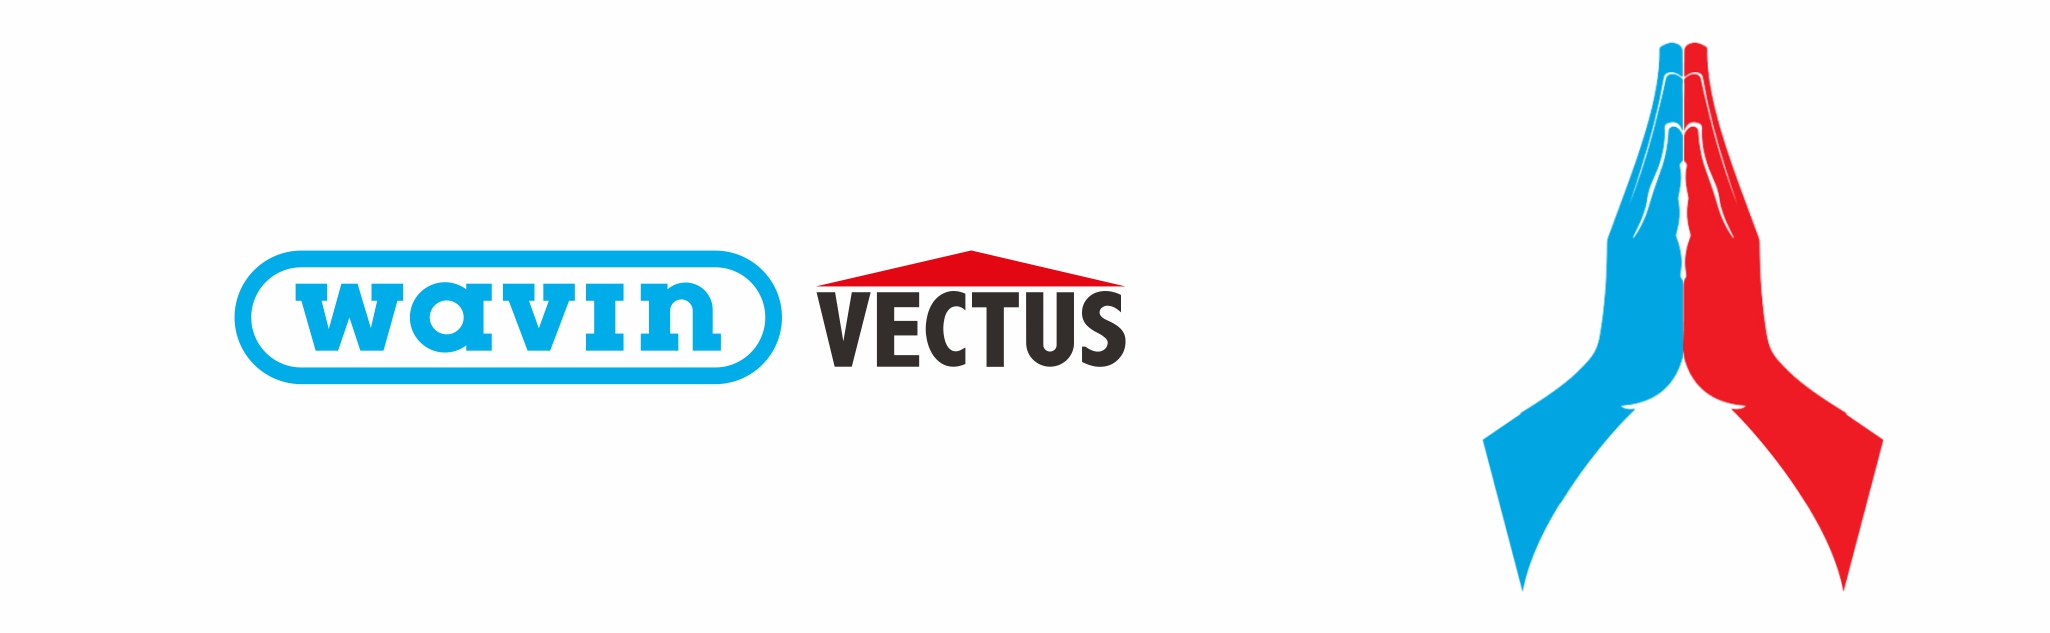 Wavin Orbia Building and Infrastructure Business Joins Forces with Vectus